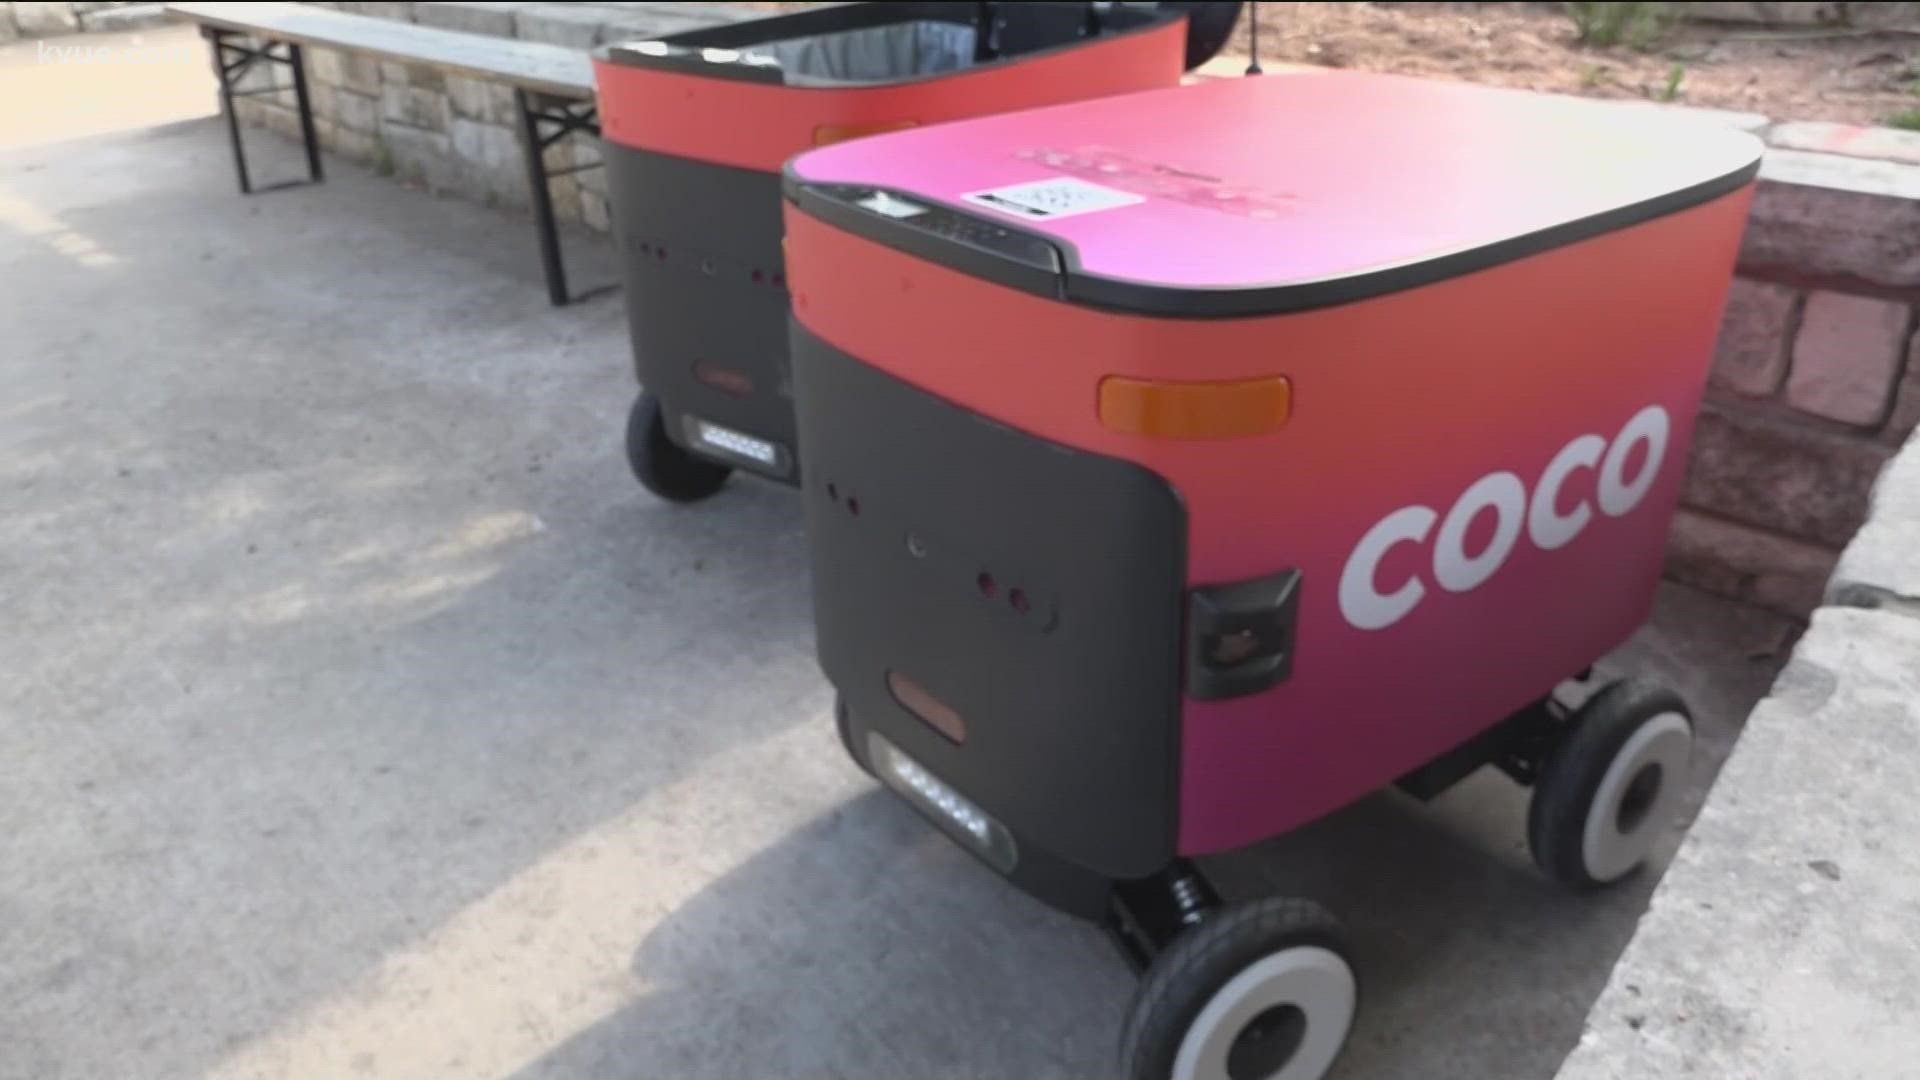 Over 20 Austin restaurants use the COCO robot taxis to delivery items within a 2 mile radius.